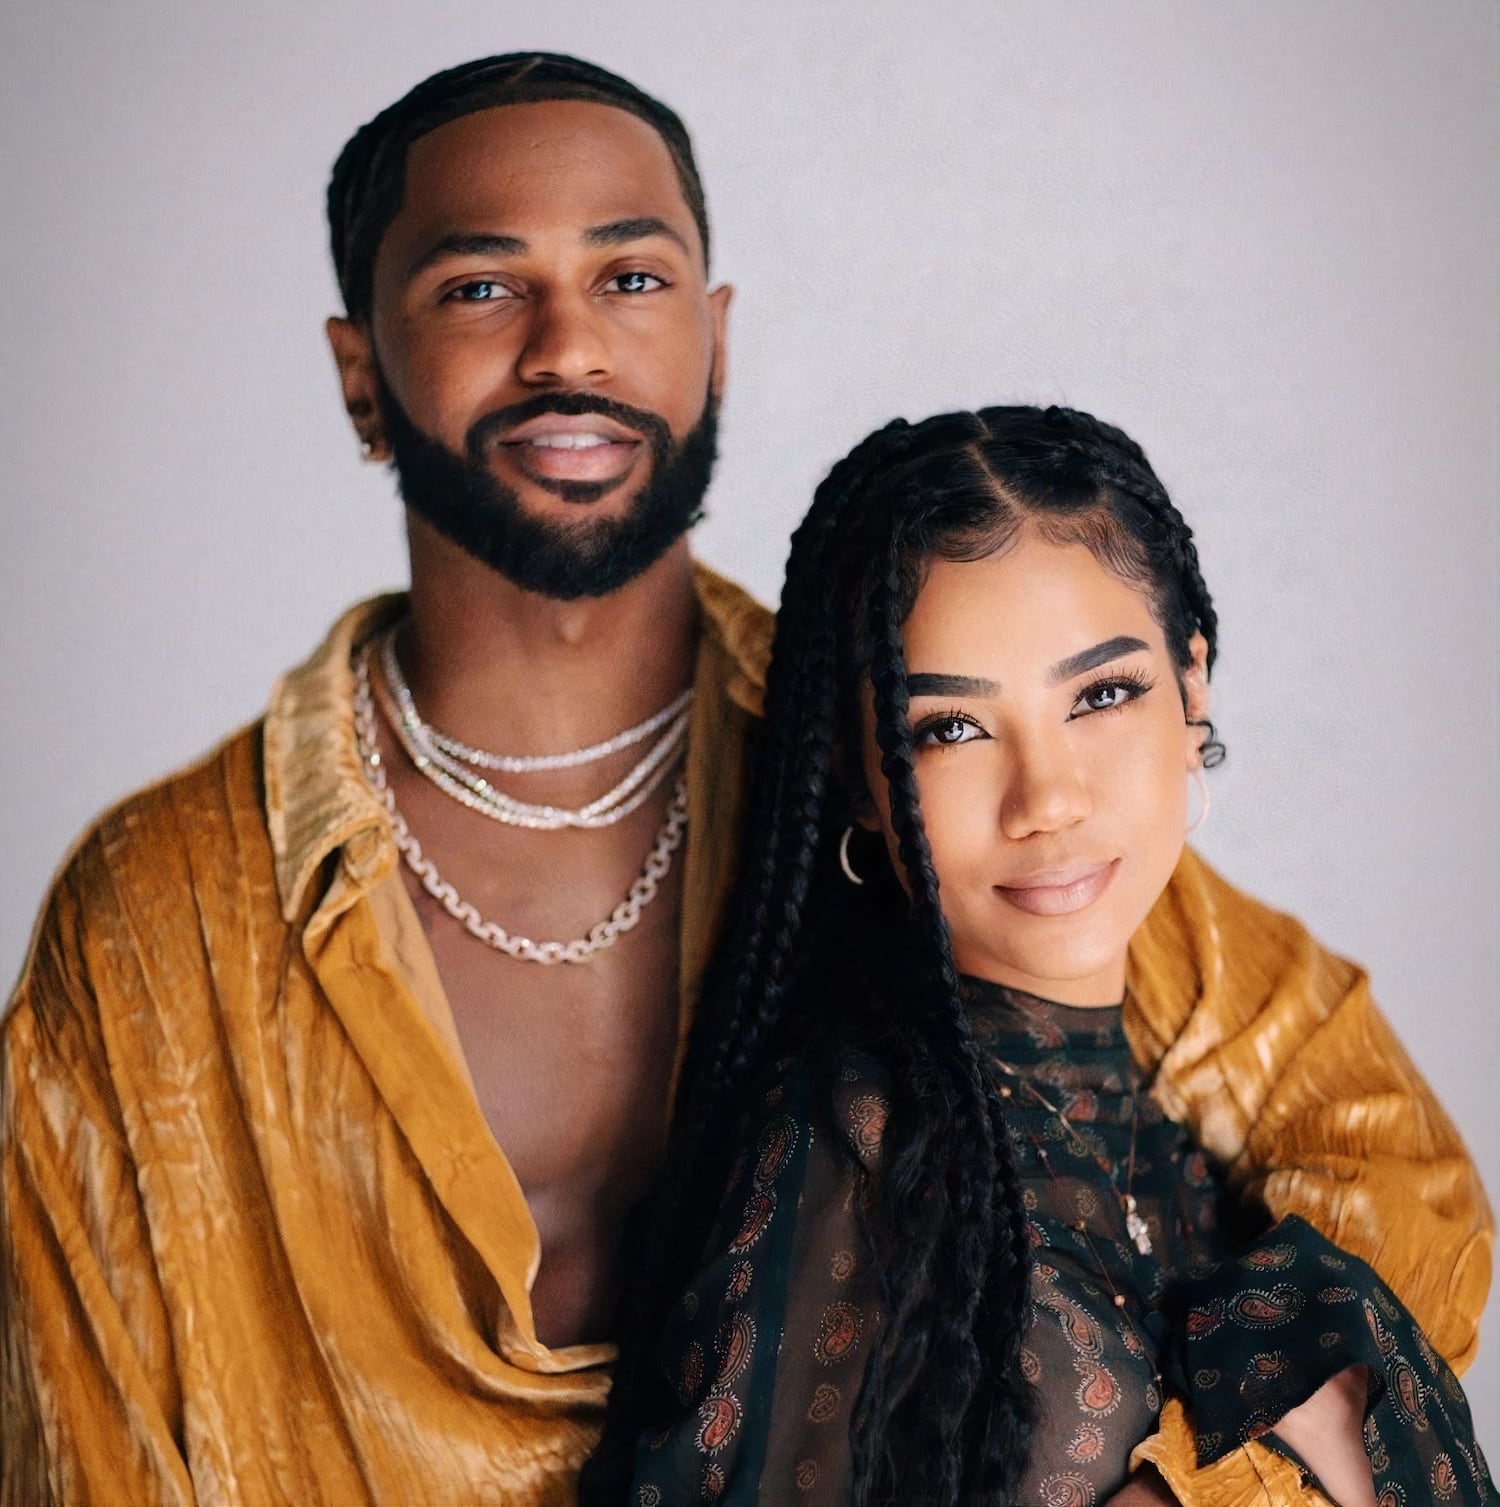 Pregnant Jhené Aiko And Big Sean Reveal They Are Having A Baby Boy